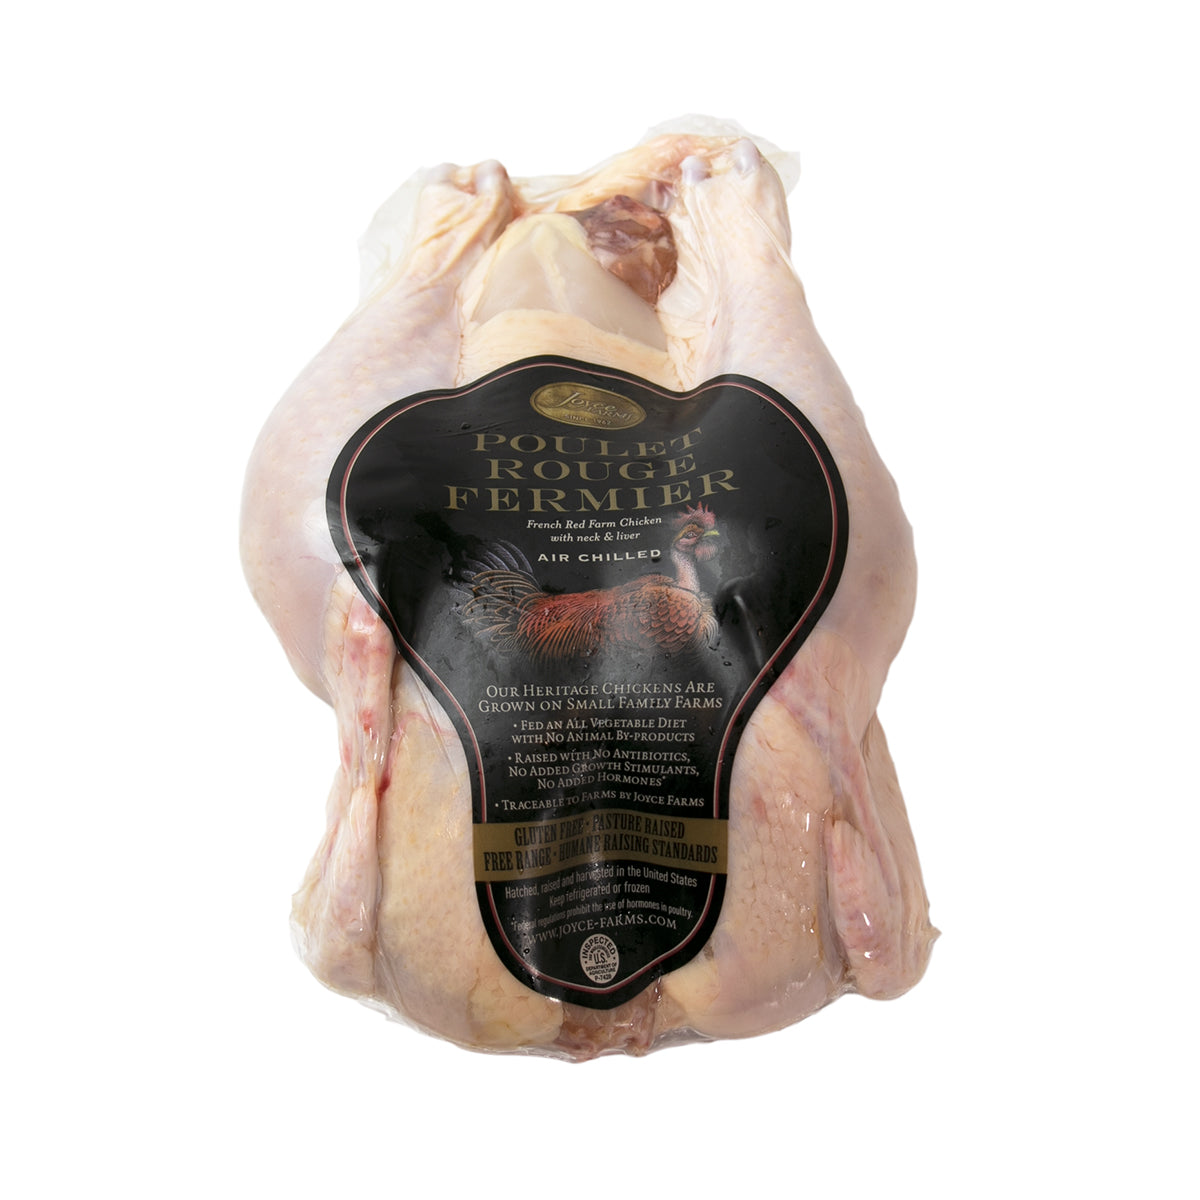 A Poulet Rouge® Whole Heritage Chicken from Joyce Farms with heritage flavor on a white background.